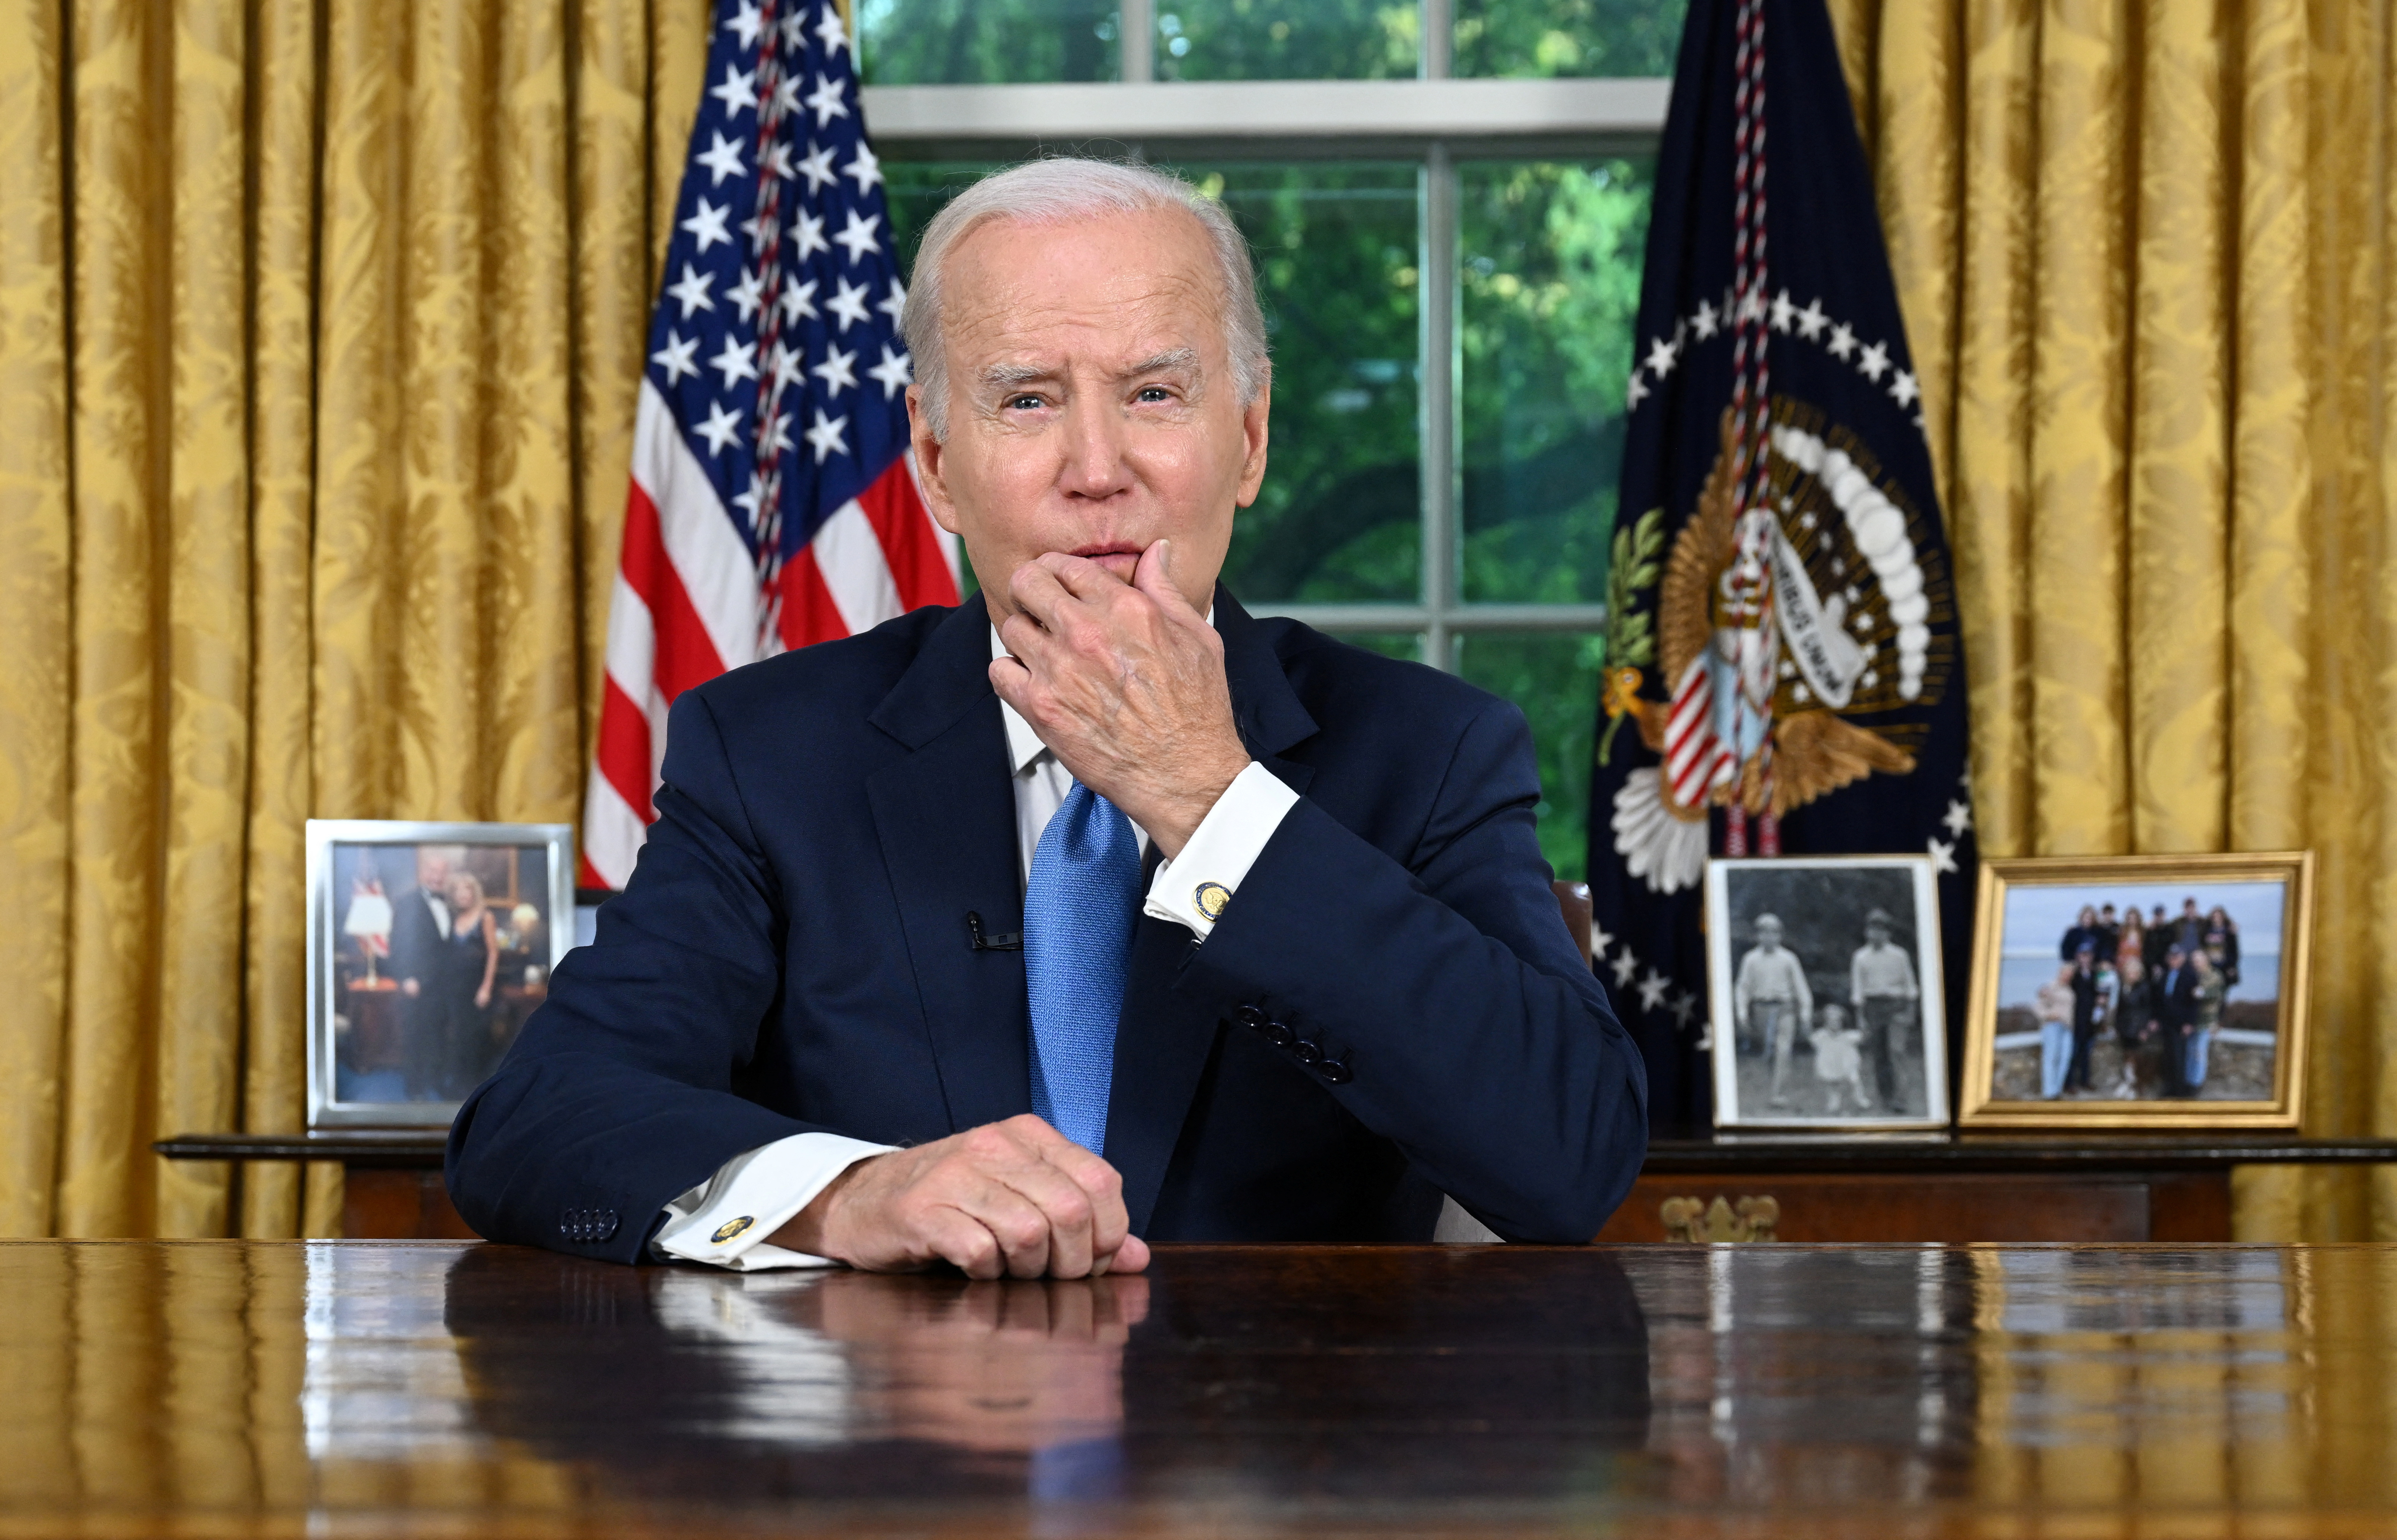 Civil Rights Organizations Urge Biden Administration to Use Executive Authority to Protect Immigrant Families and Workers The groups write, “Immigration is one of the key civil rights issues of our time.”